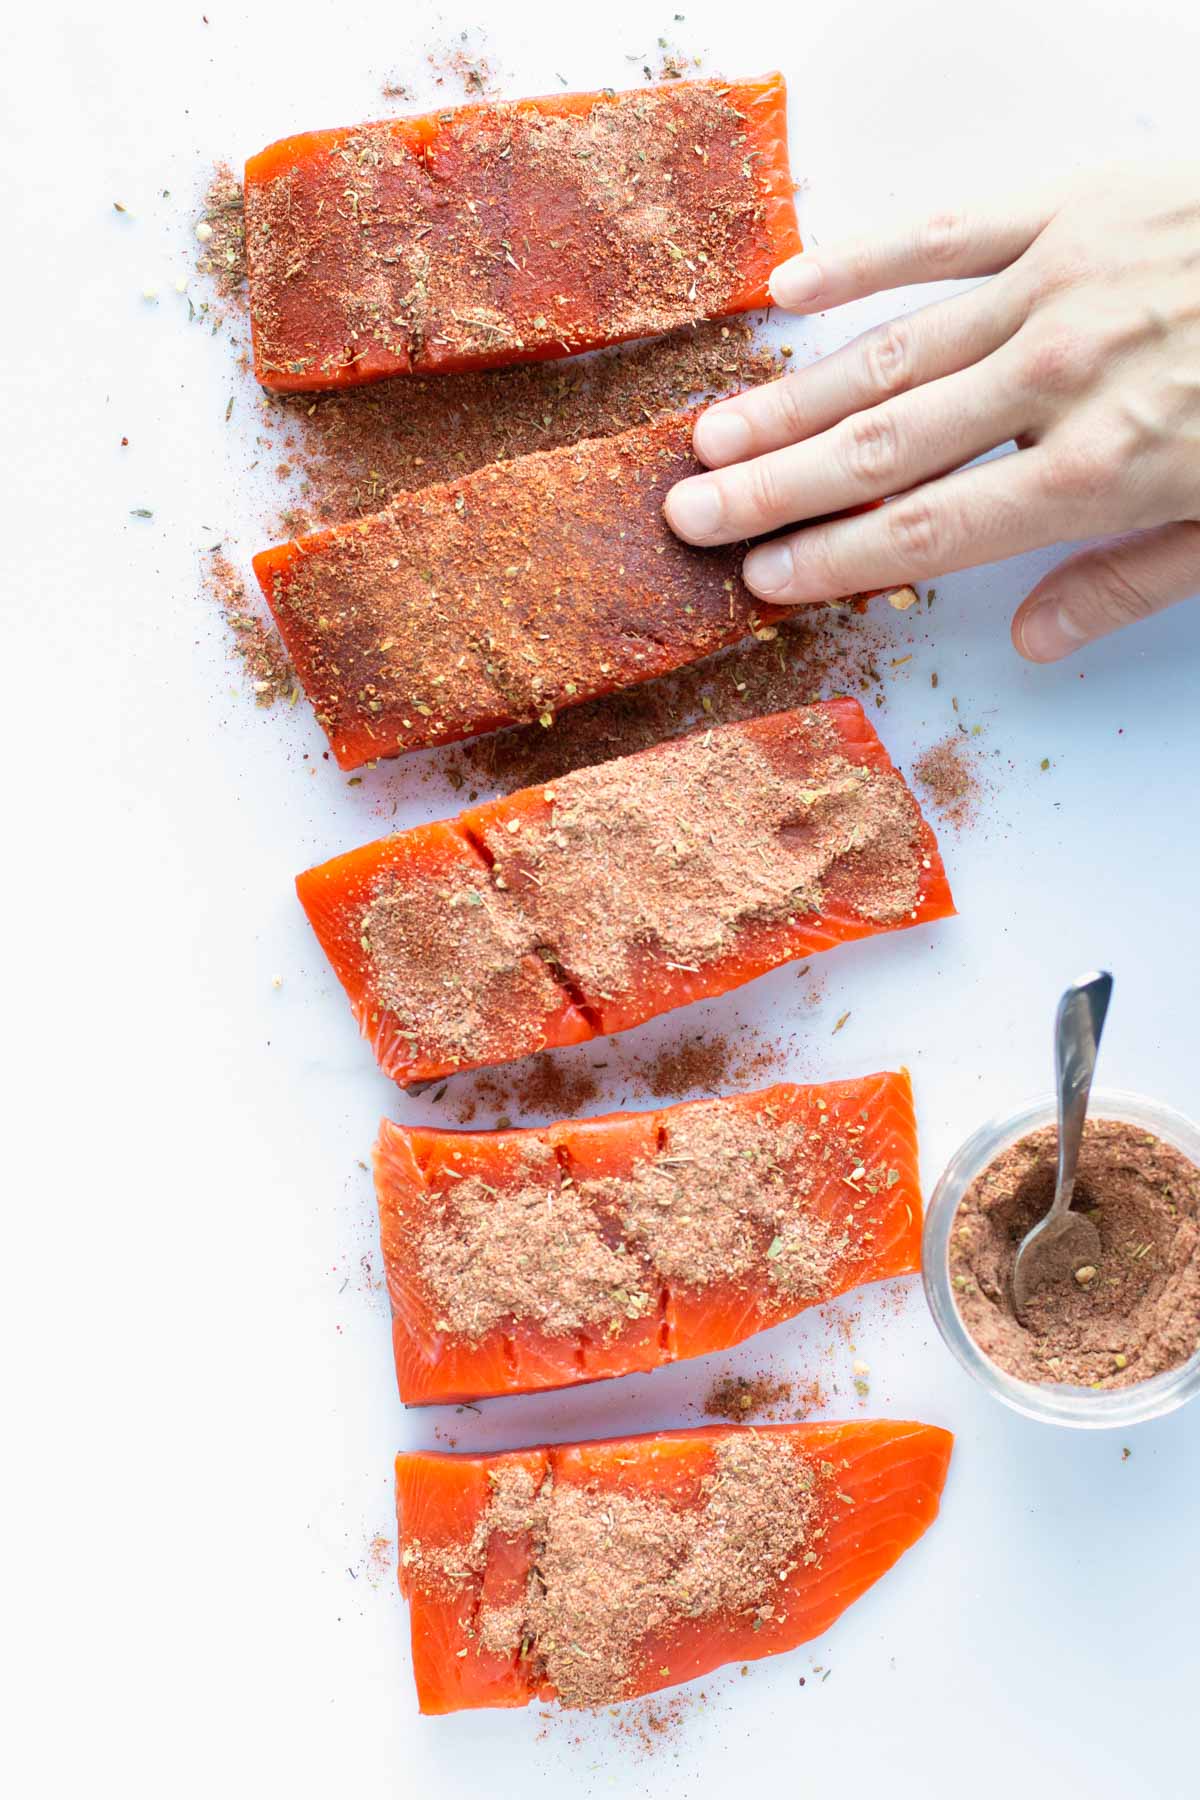 Blackened seasoning mix being rubbed into salmon filets on a white cutting board.